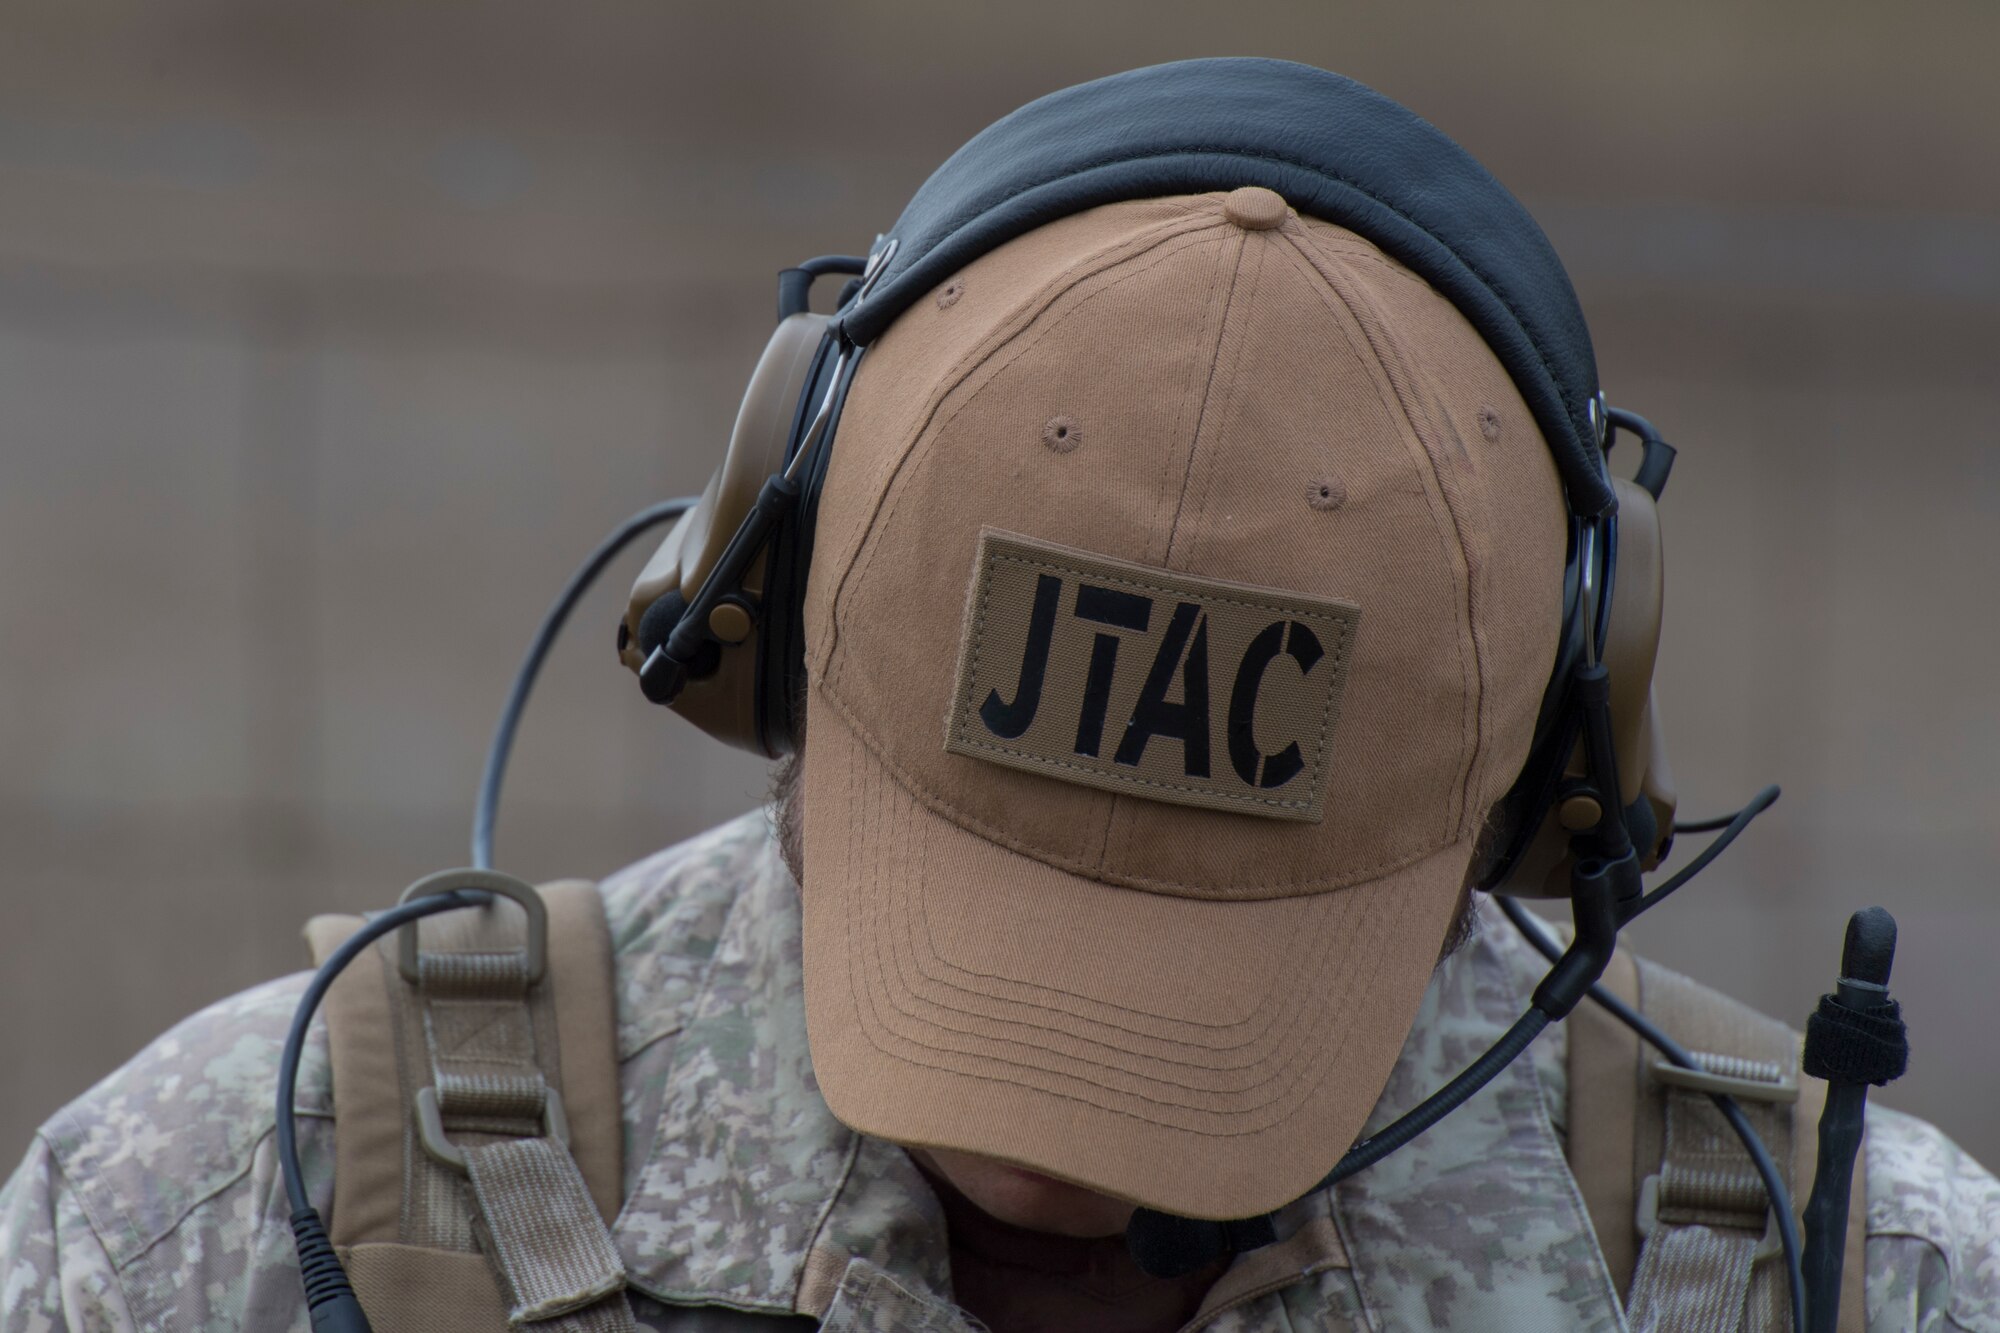 A New Zealand army joint terminal attack controller wears a hat to block the sun during combined training, Feb 20, 2018, in Lakeland, Ga. Ally forces from the Canadian Royal Air Force and NZA traveled to Moody Air Force Base, Ga., to train with the 75th Fighter Squadron on close air support. (U.S. Air Force photo by Staff Sgt. Eric Summers Jr.)